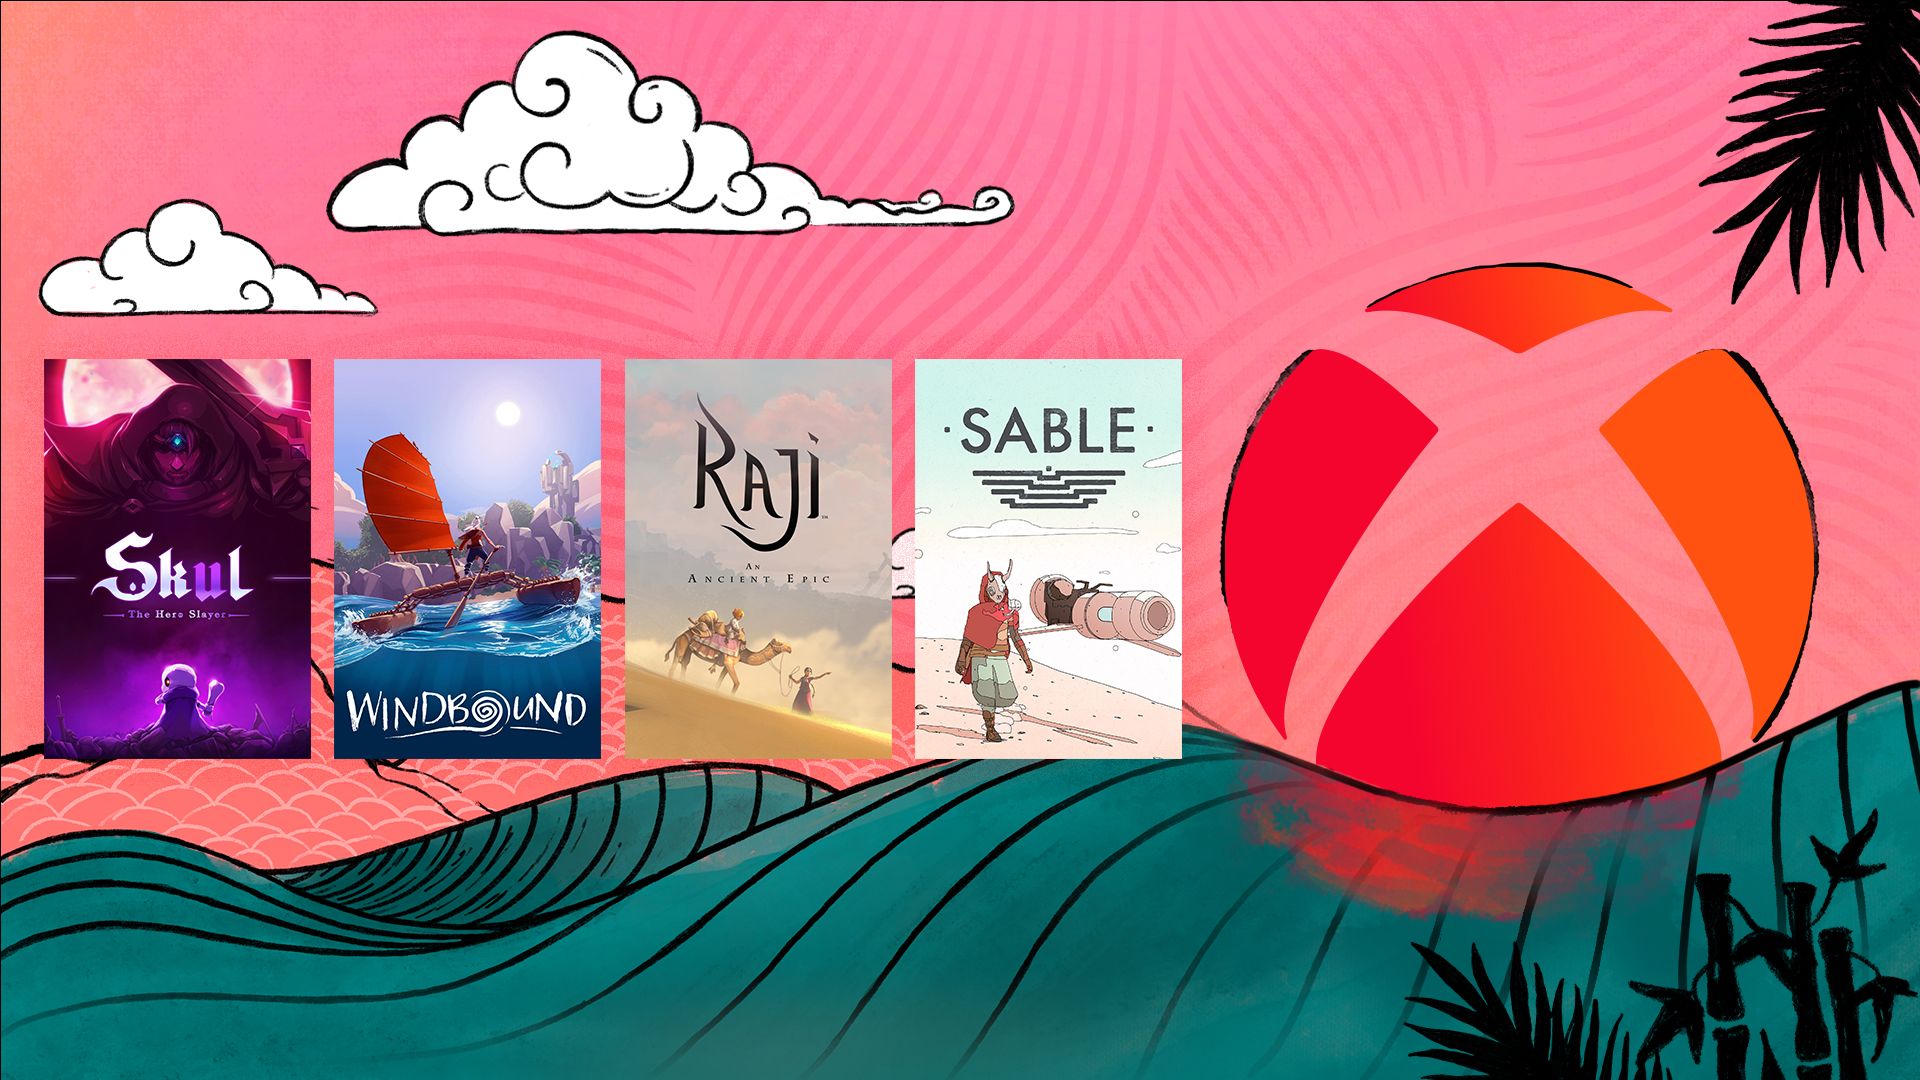 A shoreline scene with mountains, clouds in the sky and the Xbox logo as a setting sun featuring four game titles: Skul, Windbound, Raji and Sable.